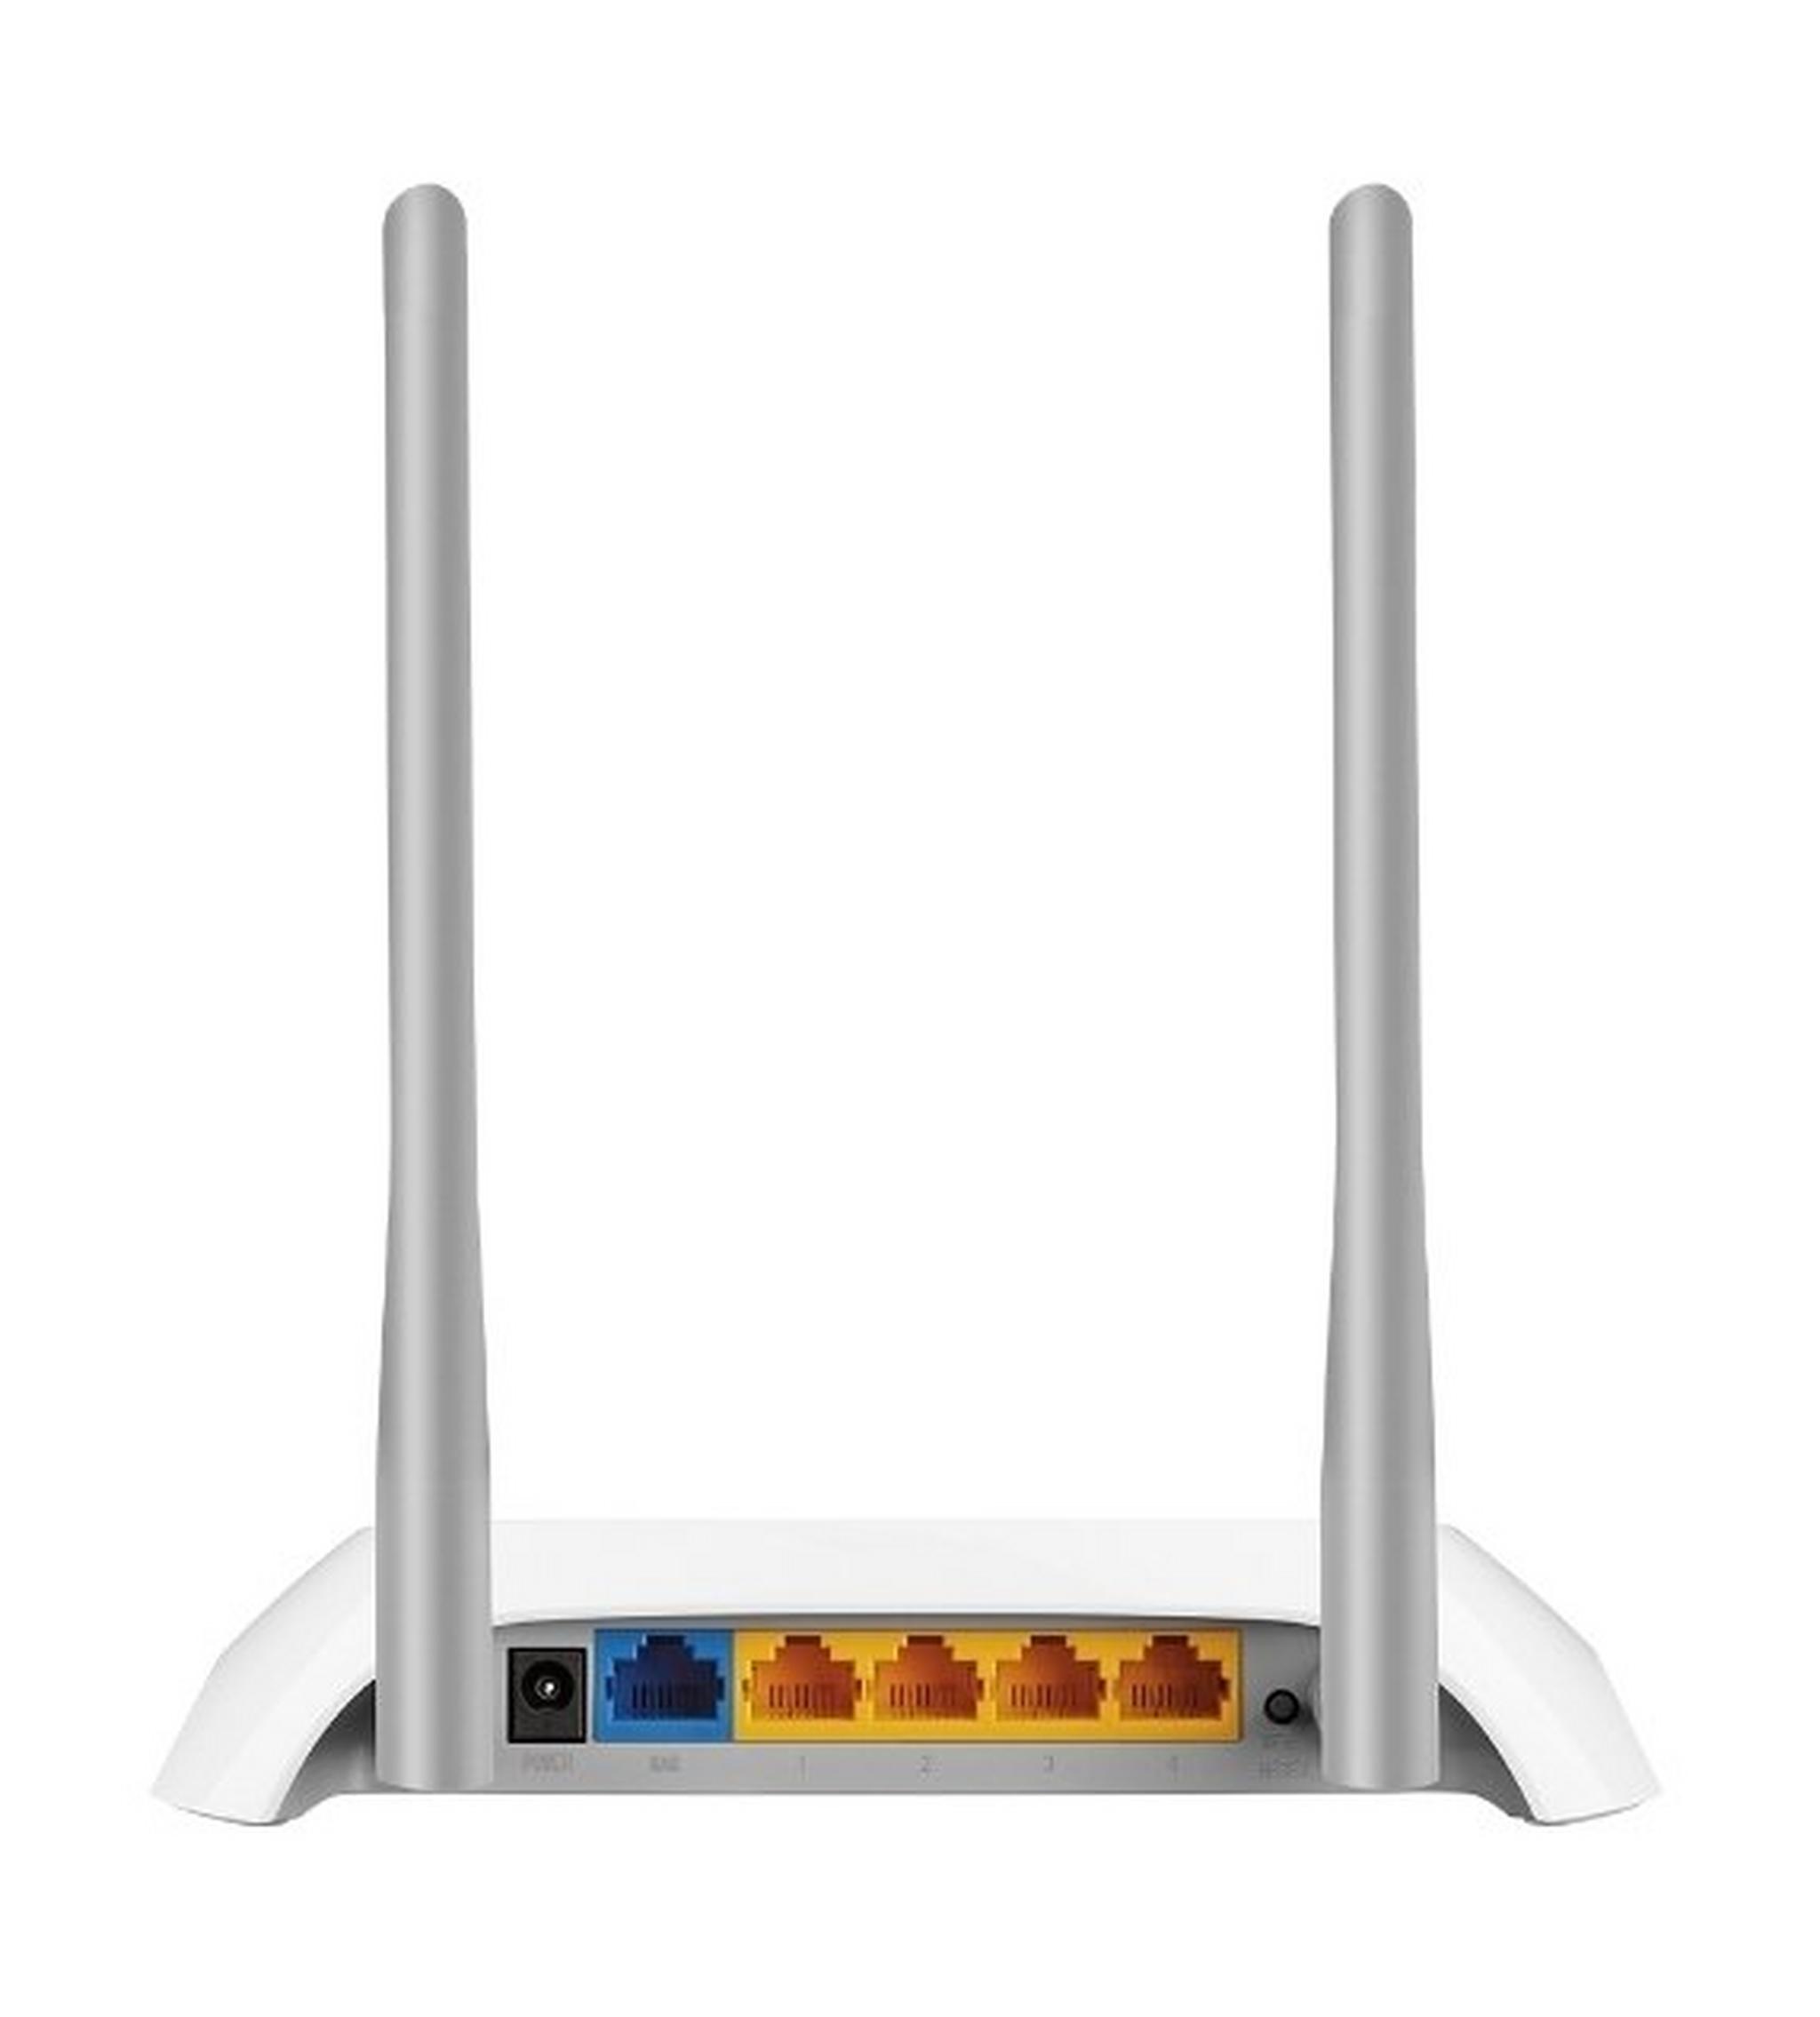 TP-Link WR840N 300 Mbps Wireless Network Router